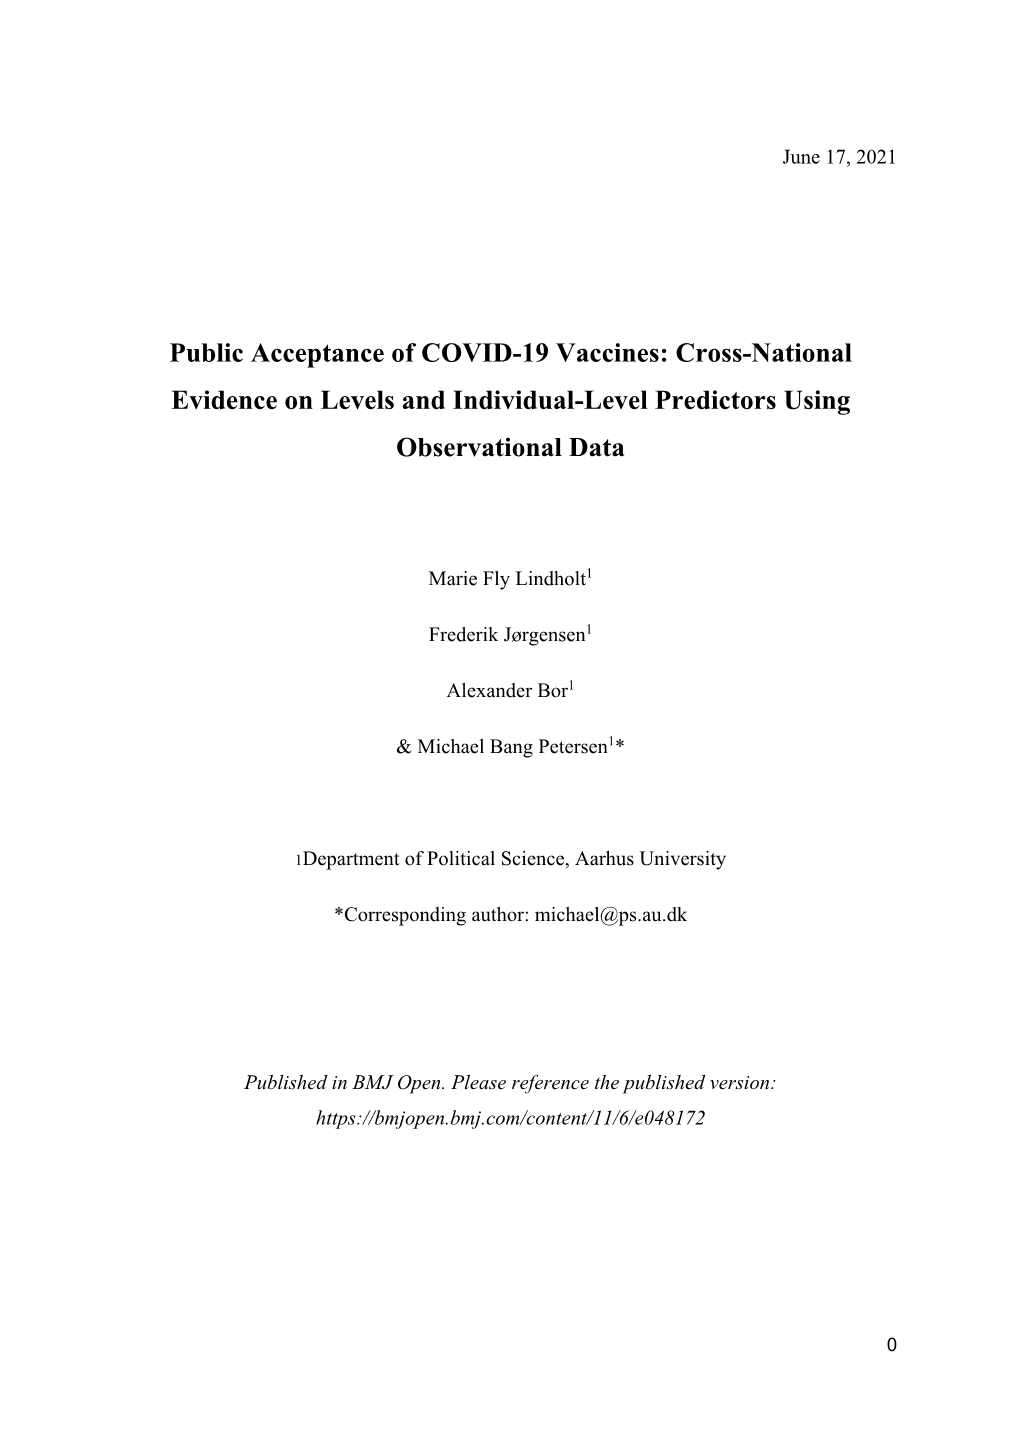 Public Acceptance of COVID-19 Vaccines: Cross-National Evidence on Levels and Individual-Level Predictors Using Observational Data